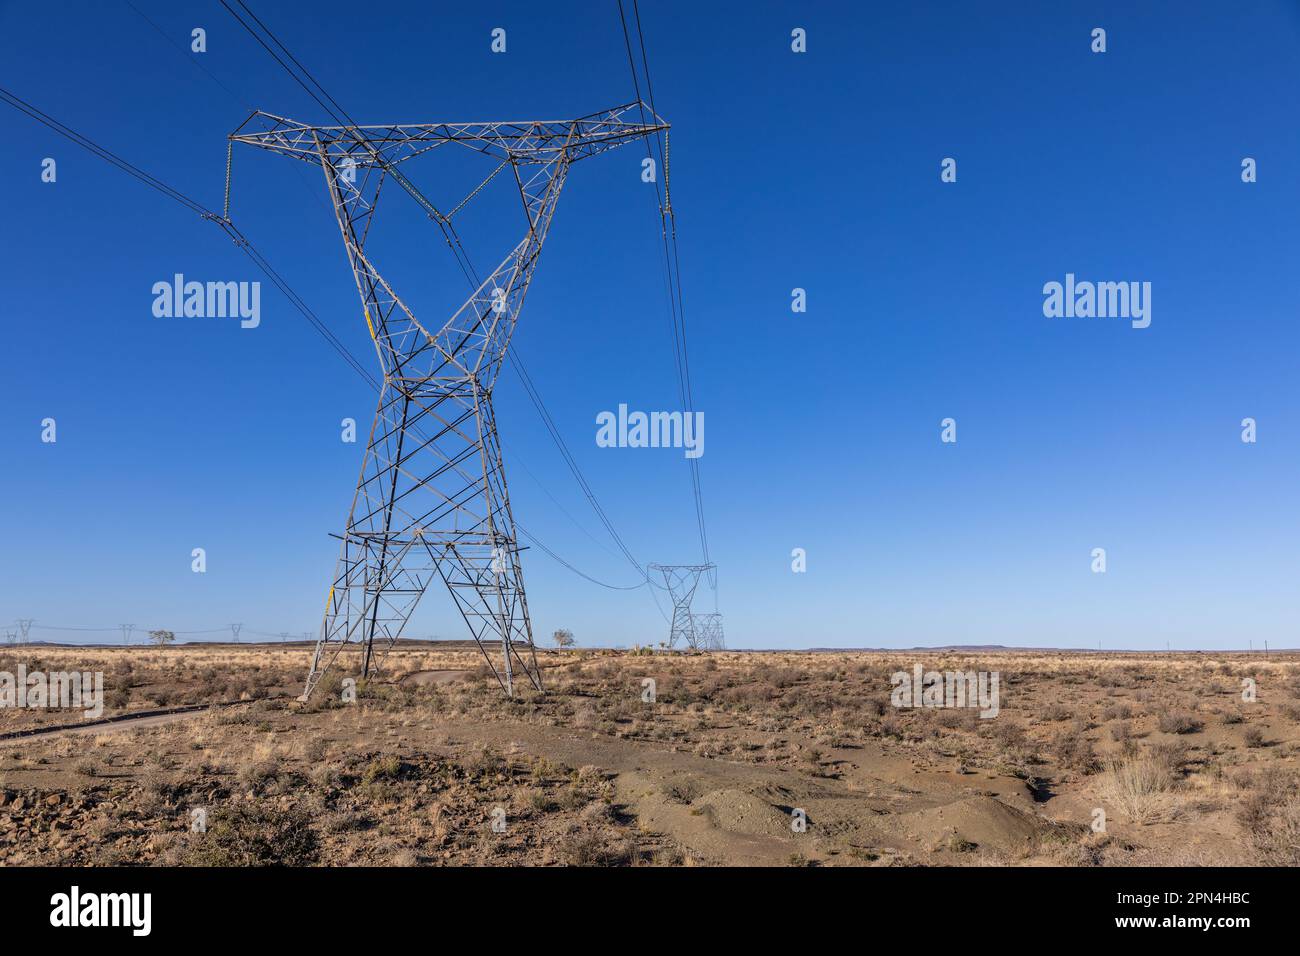 High voltage electricity transmission pylons going into the distance in the Karoo area of South Africa Stock Photo